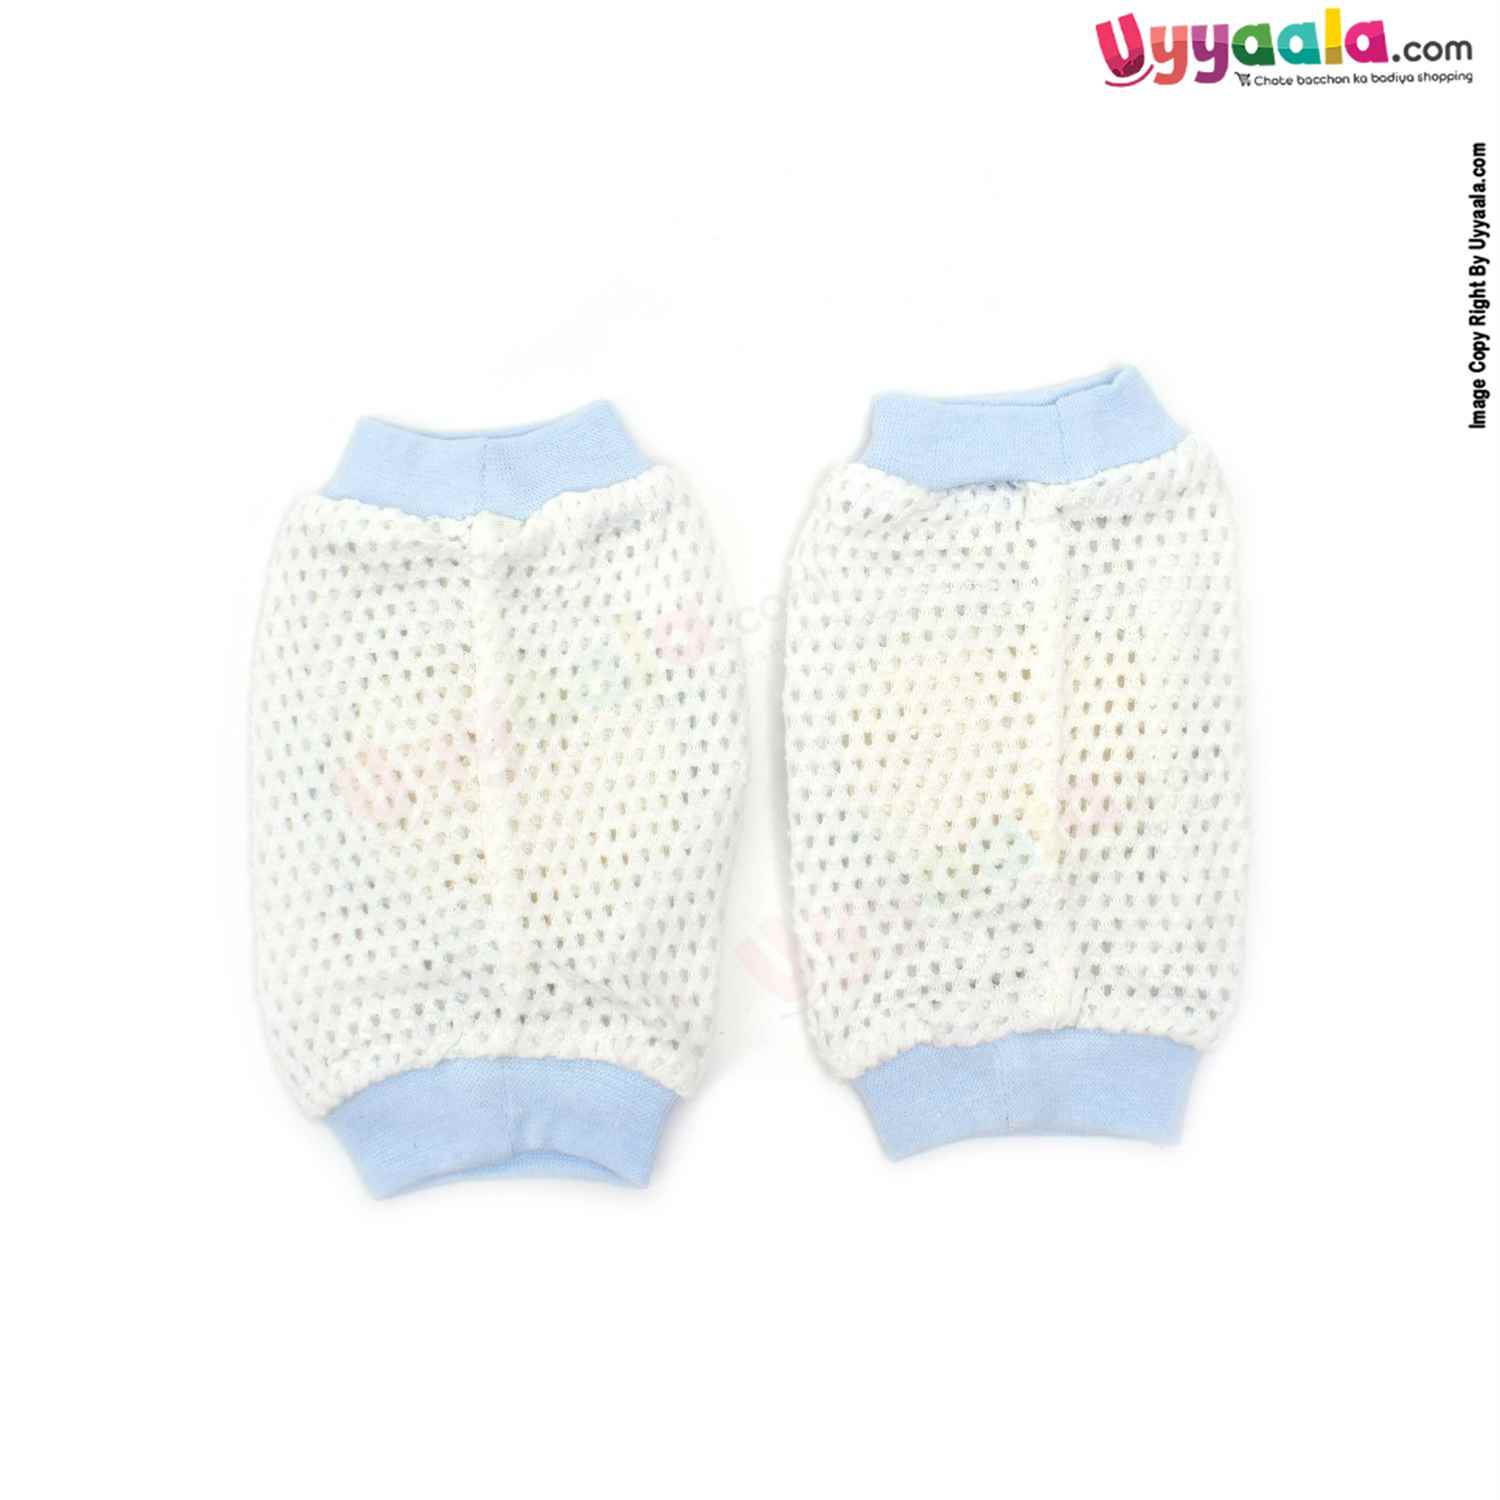 Cotton Stretchable Knee Protection Pads for Crawling Babies with Heart Shape Patch Teddy Bear Print Pack of 1 Pair , 6m-2Y Age - White & Light Blue